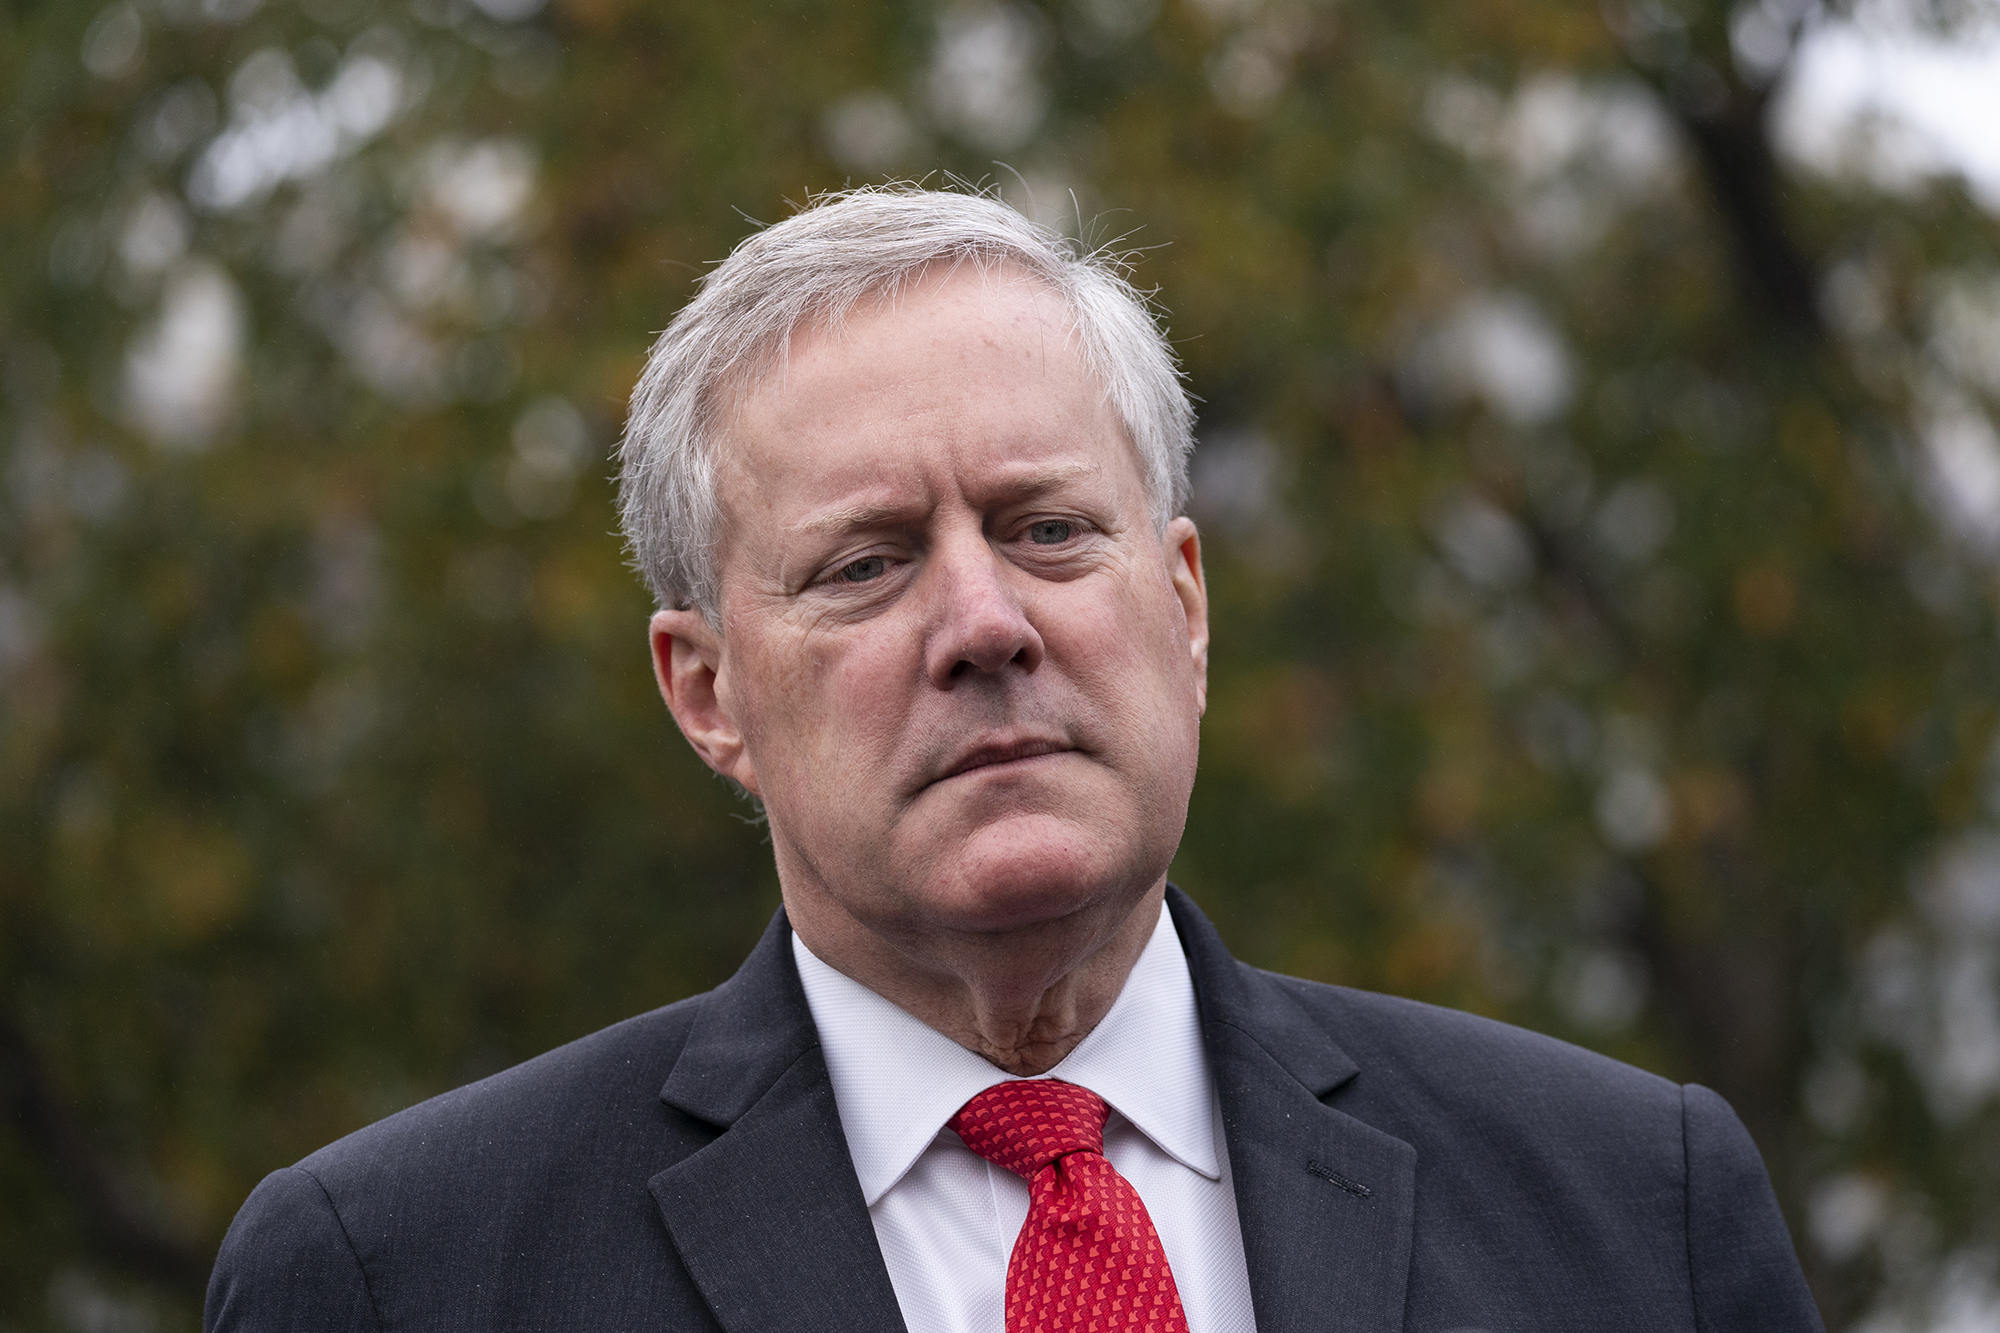 White House chief of staff Mark Meadows speaks with reporters at the White House, on Wednesday, October 21, in Washington.